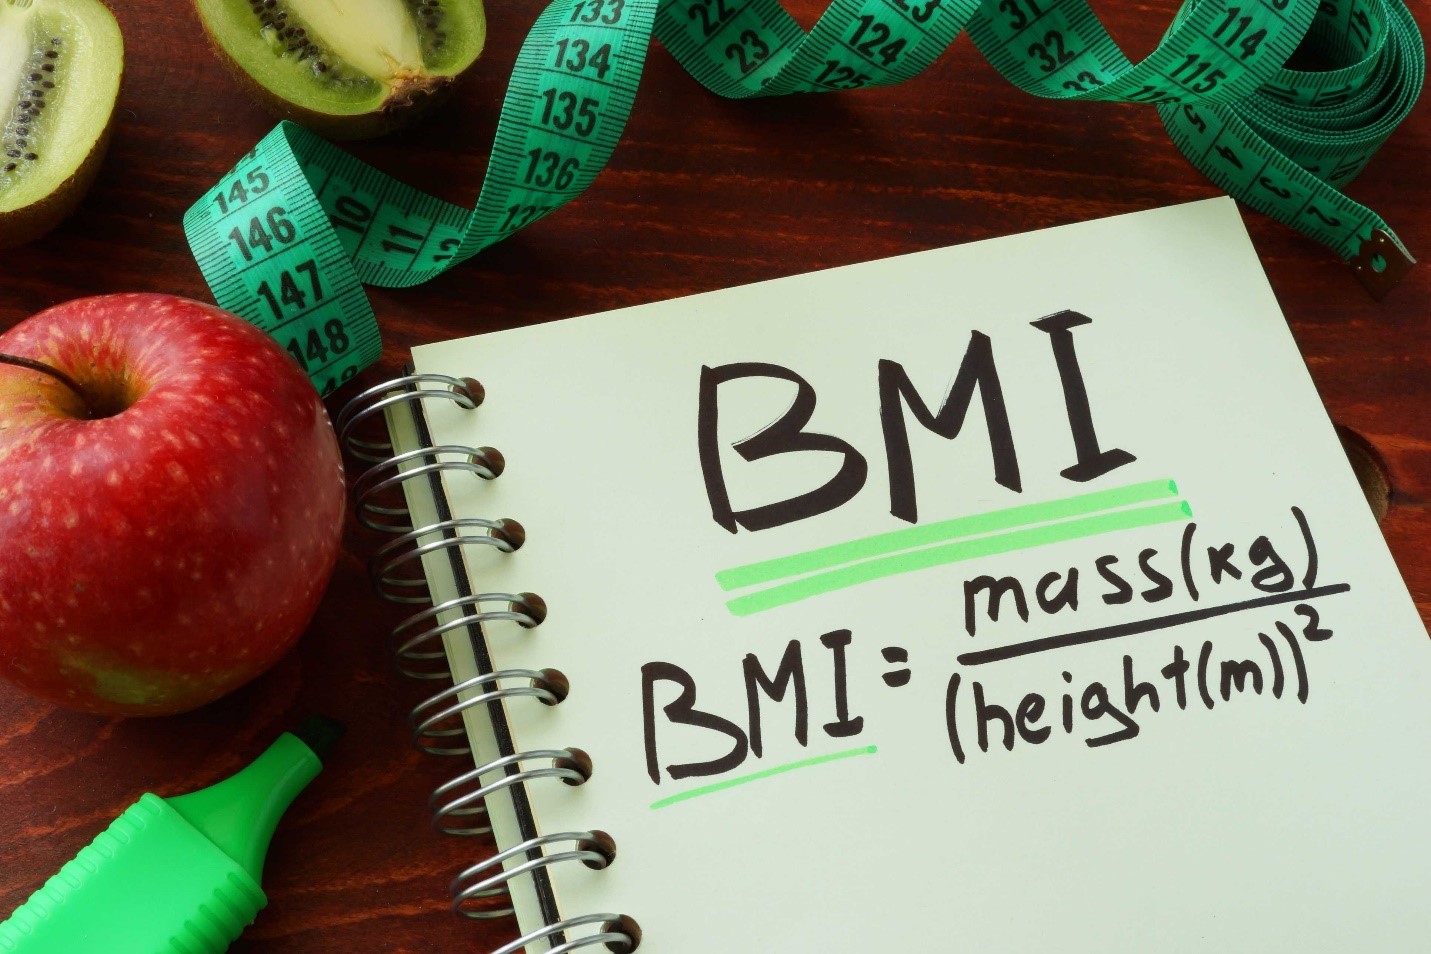 Waist size and BMI describe your health!